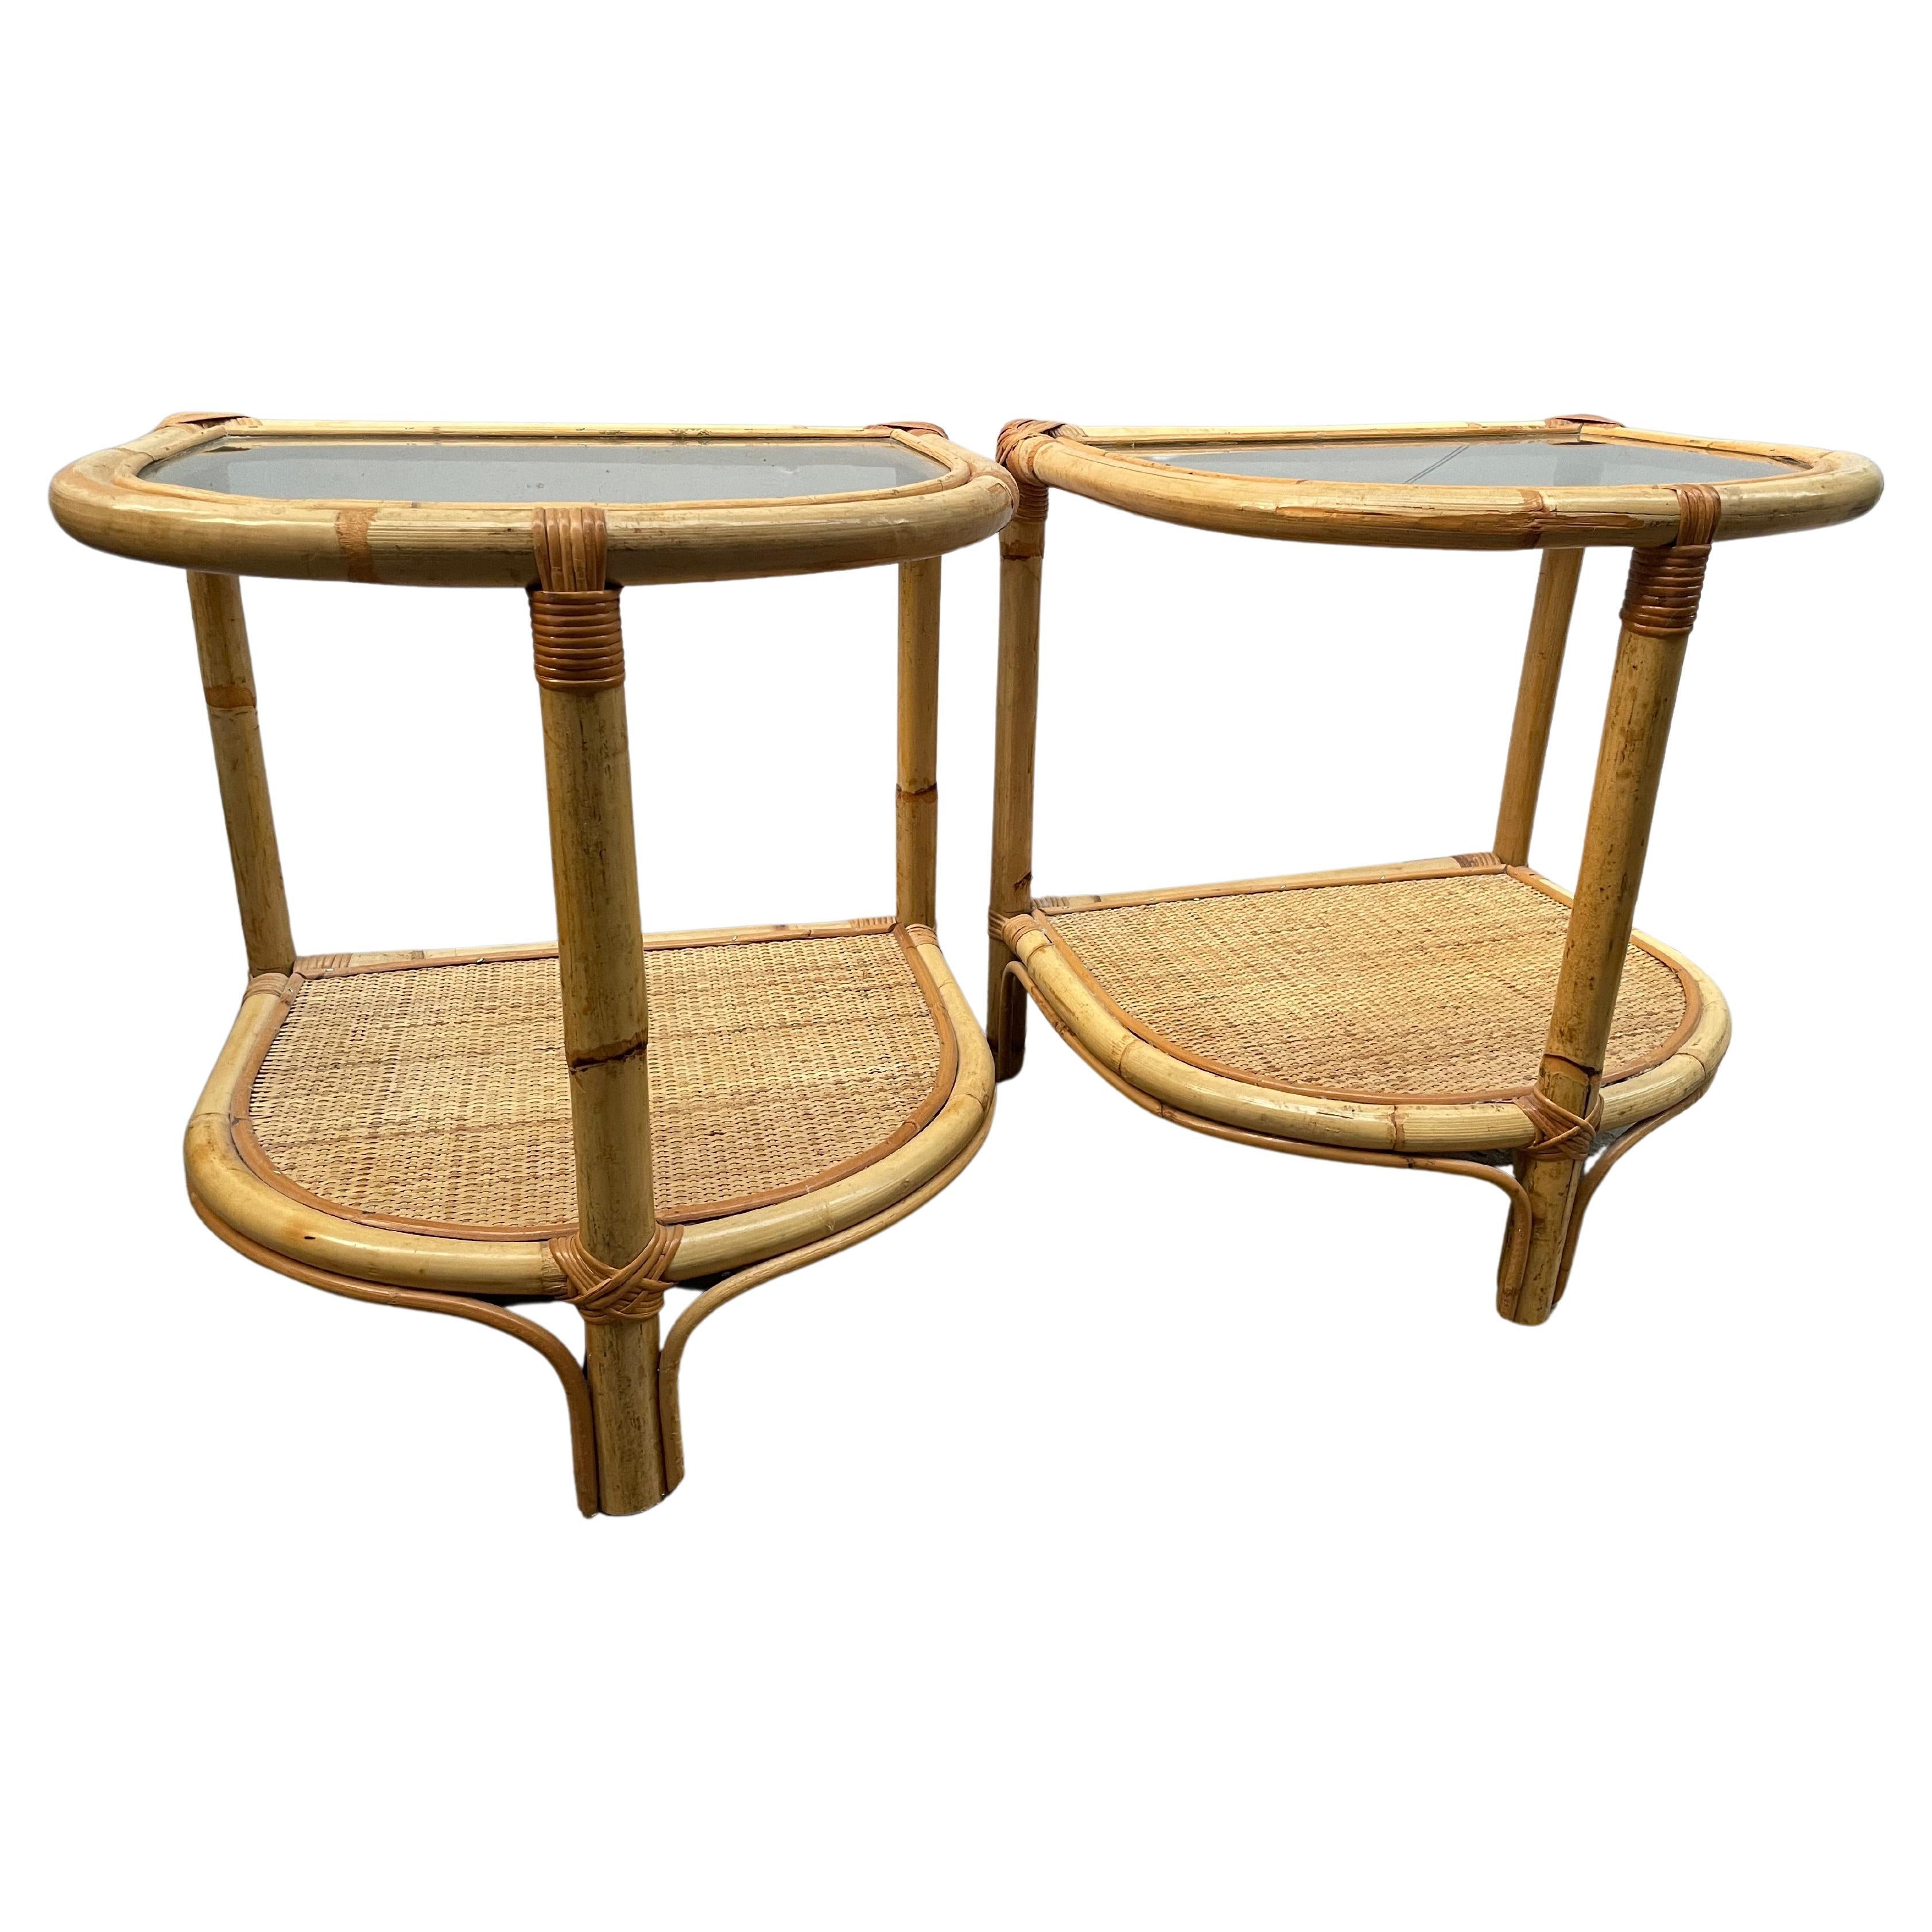 Vintage bamboo rattan nightstands, crafted in Denmark during the 1970s